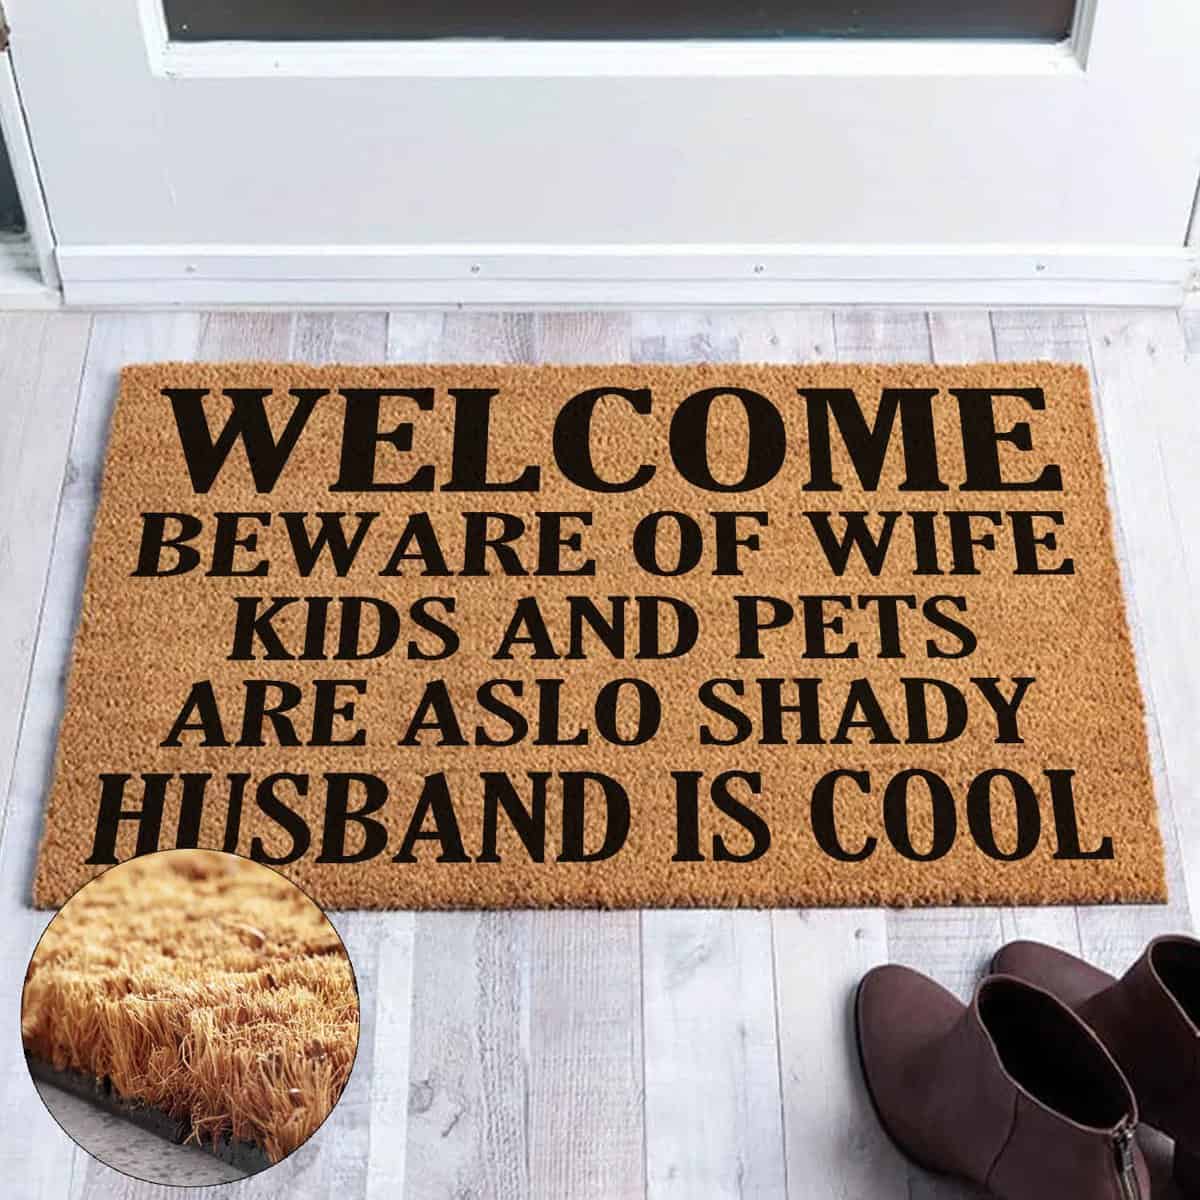 Welcome Beware Of Wife, Kids/Pets Also Shady 